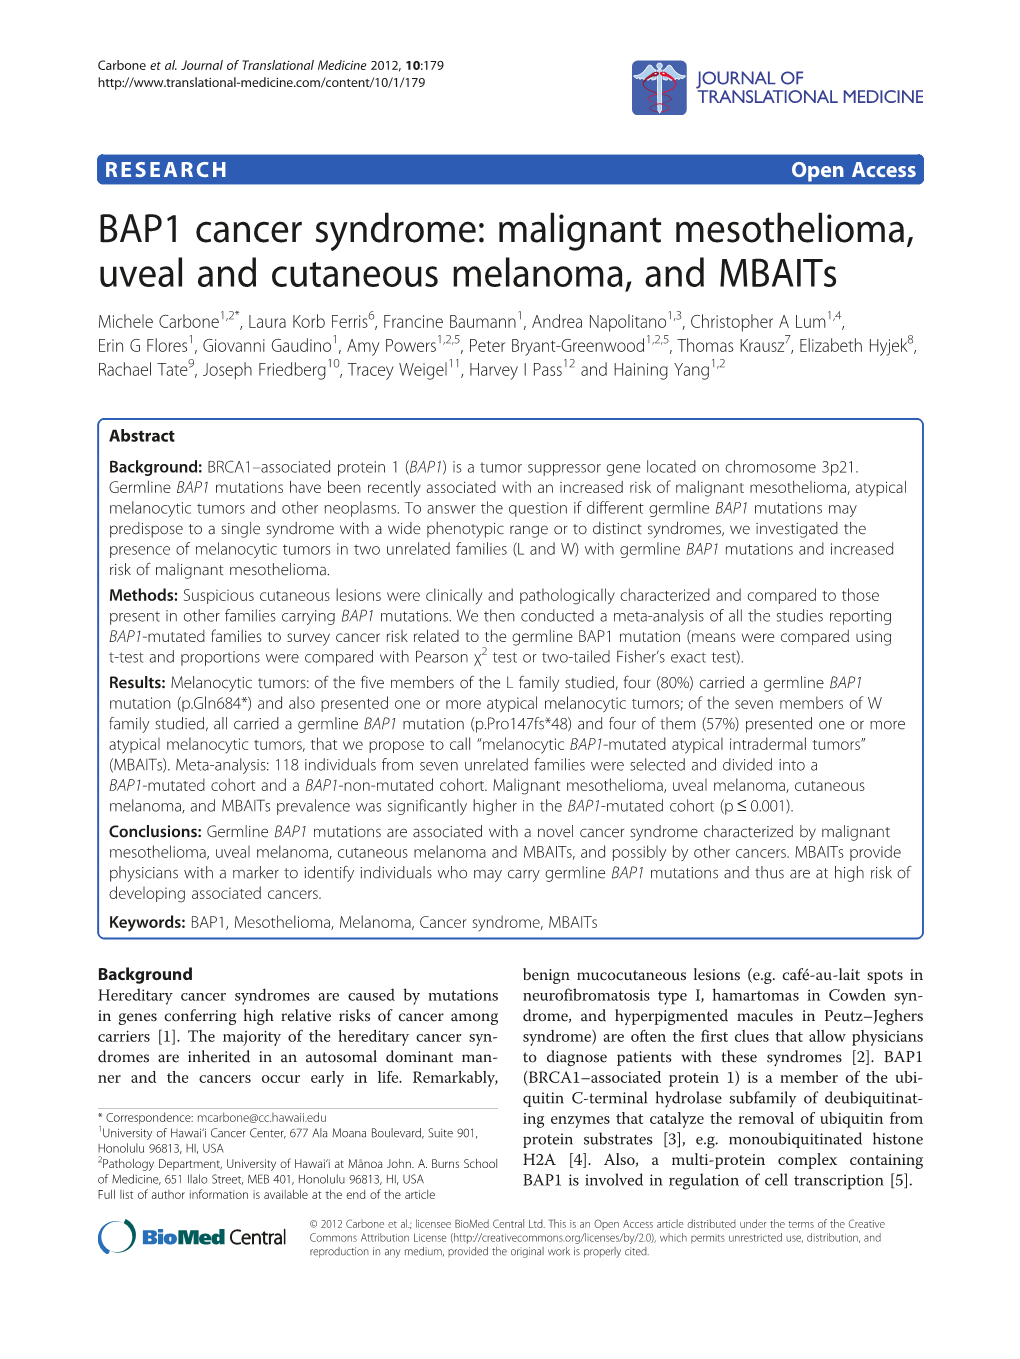 BAP1 Cancer Syndrome: Malignant Mesothelioma, Uveal And